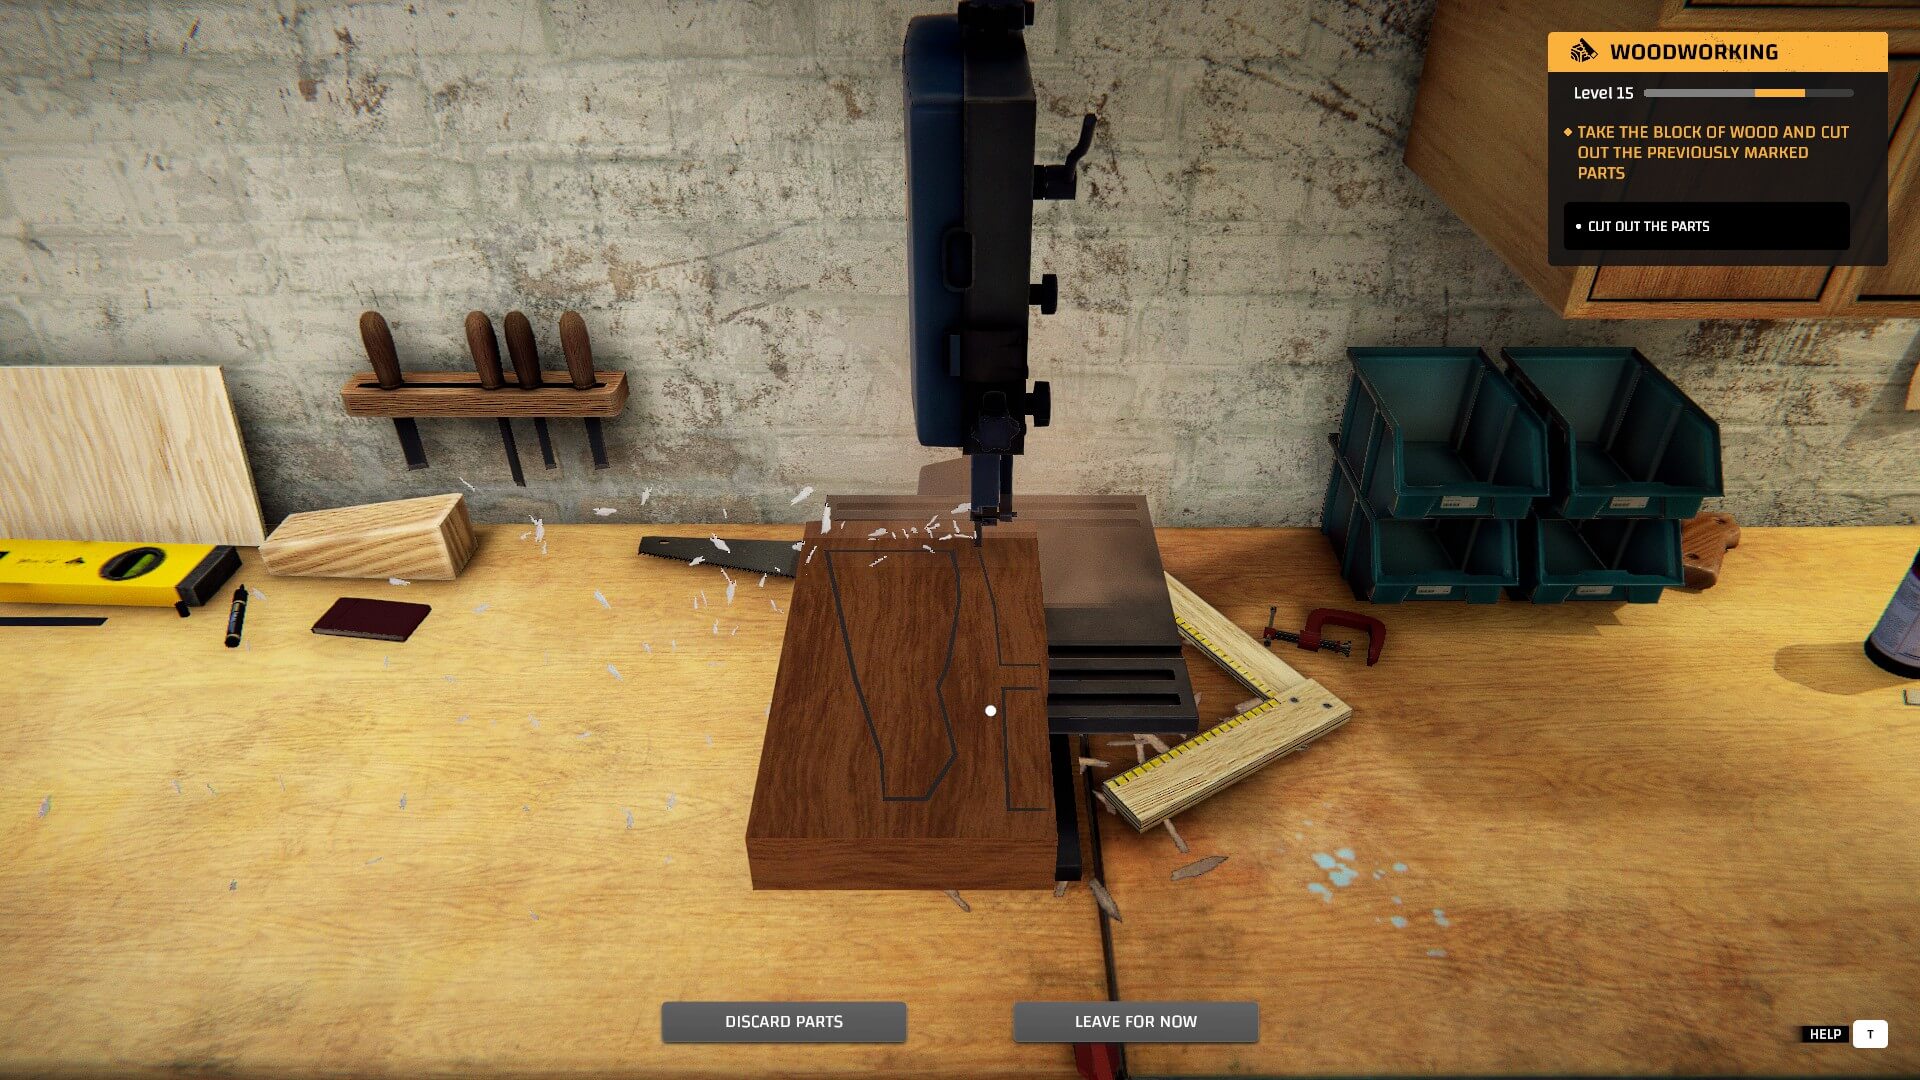 I'm currently using the work bench to make a new set of wooden parts for the AKM .